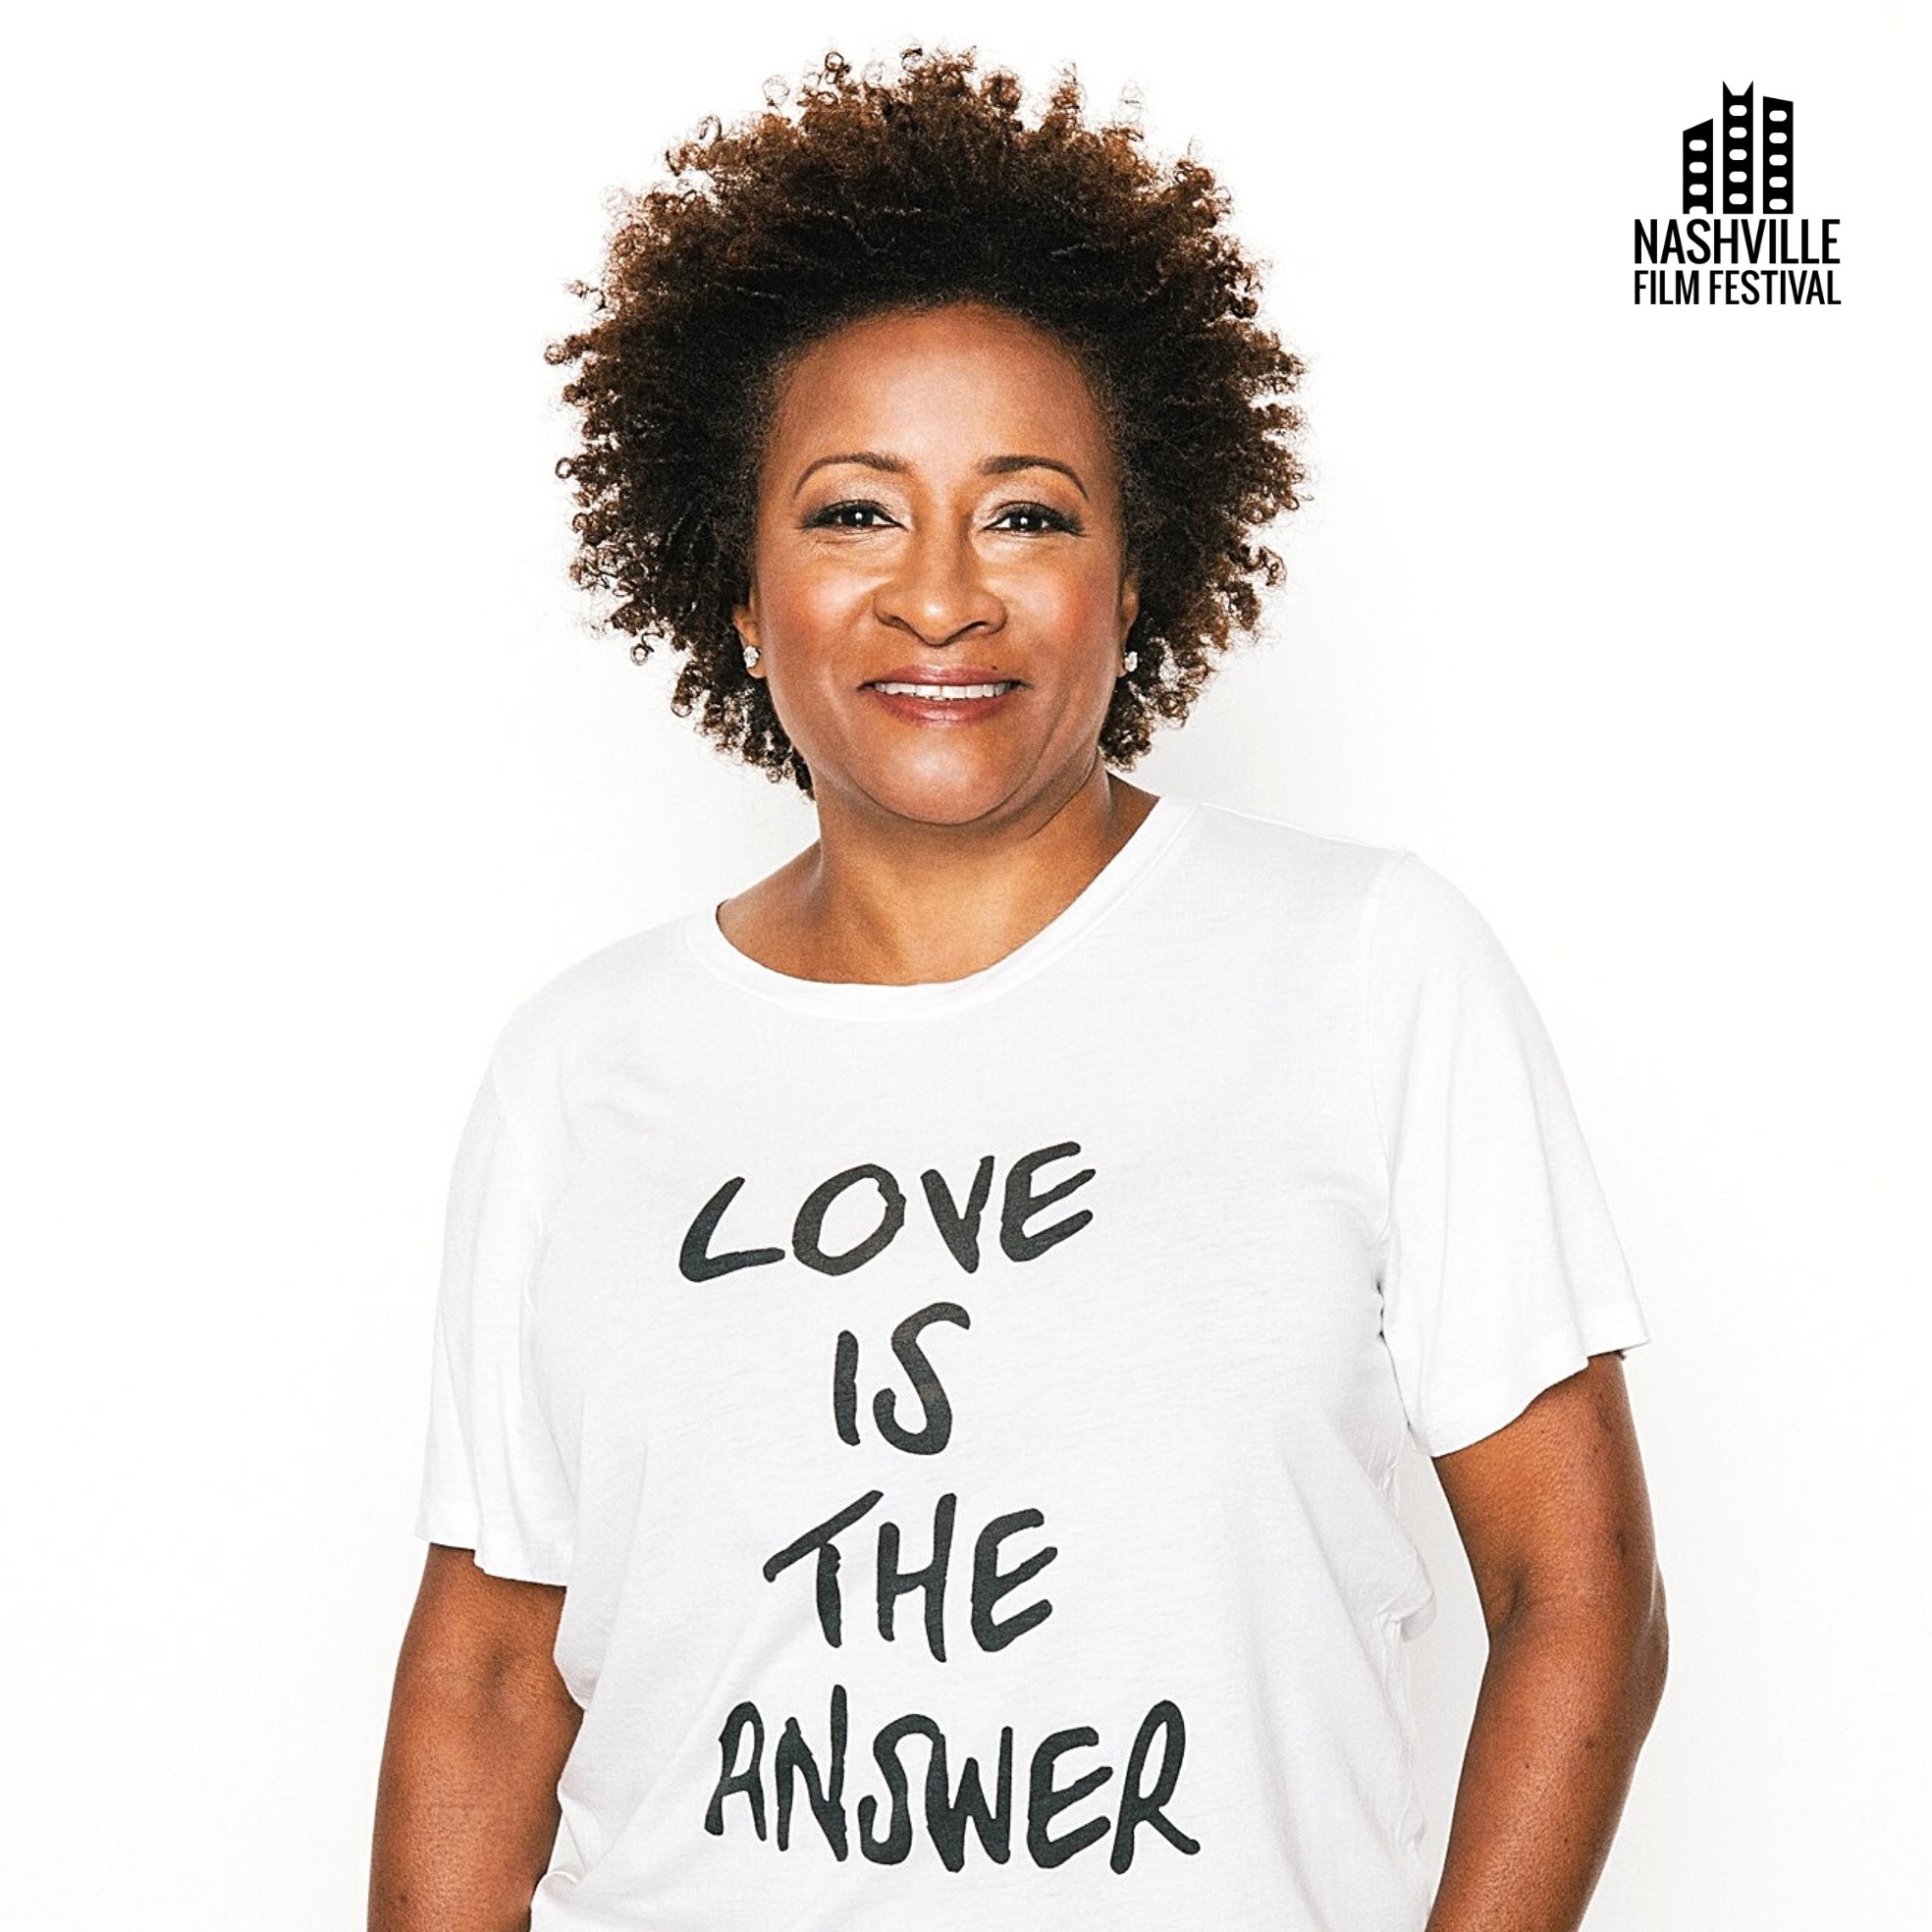 Happy birthday to the one and only WANDA SYKES!  